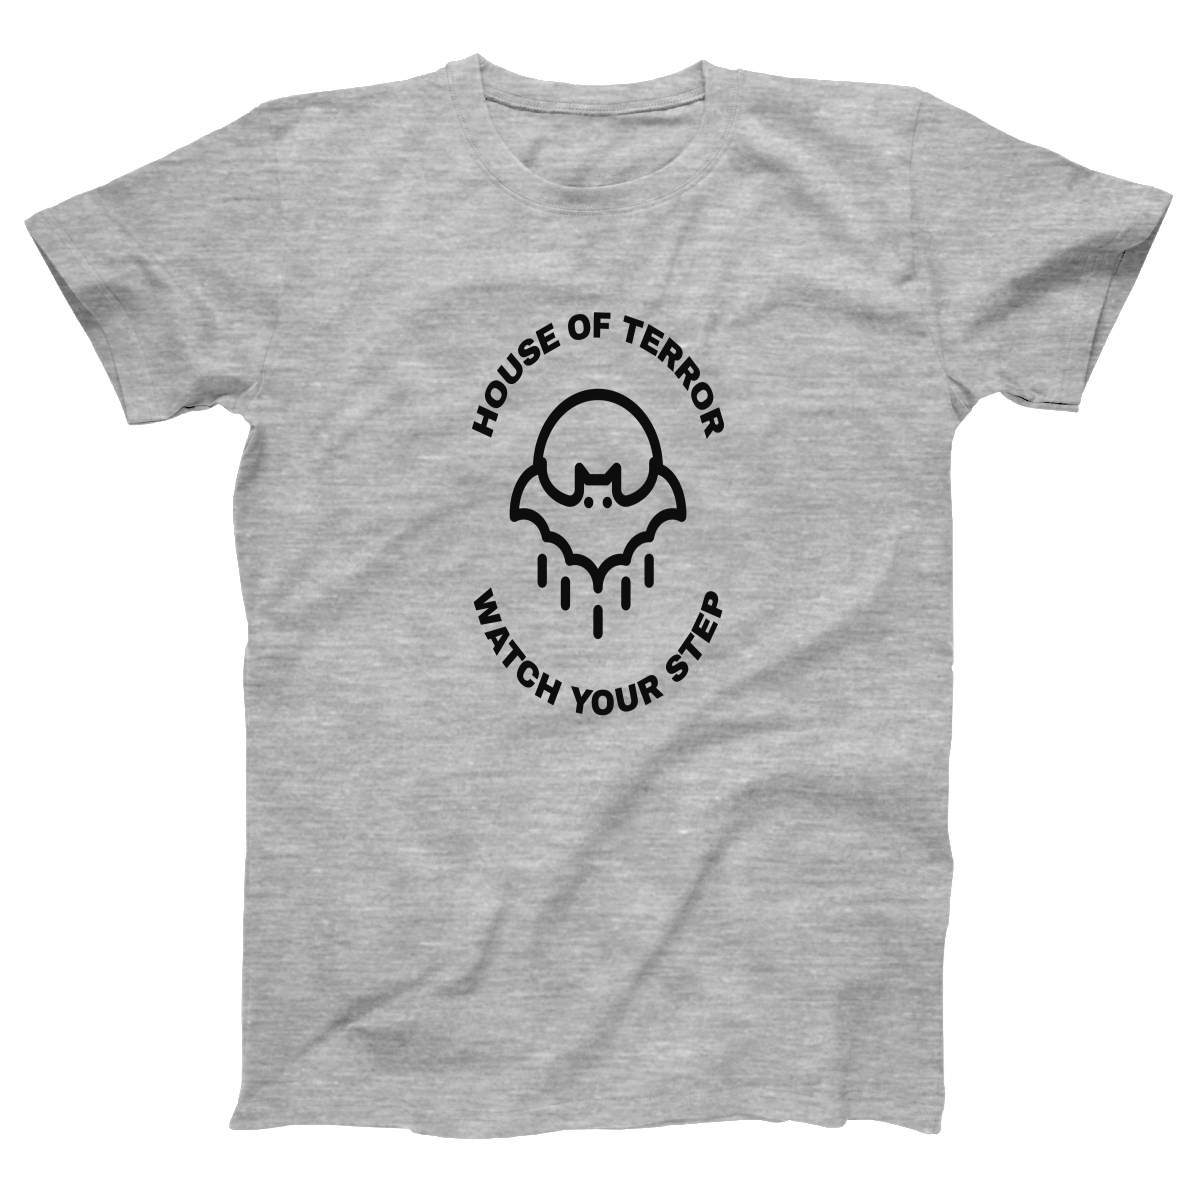 House of Terror Watch Your Step Women's T-shirt | Gray